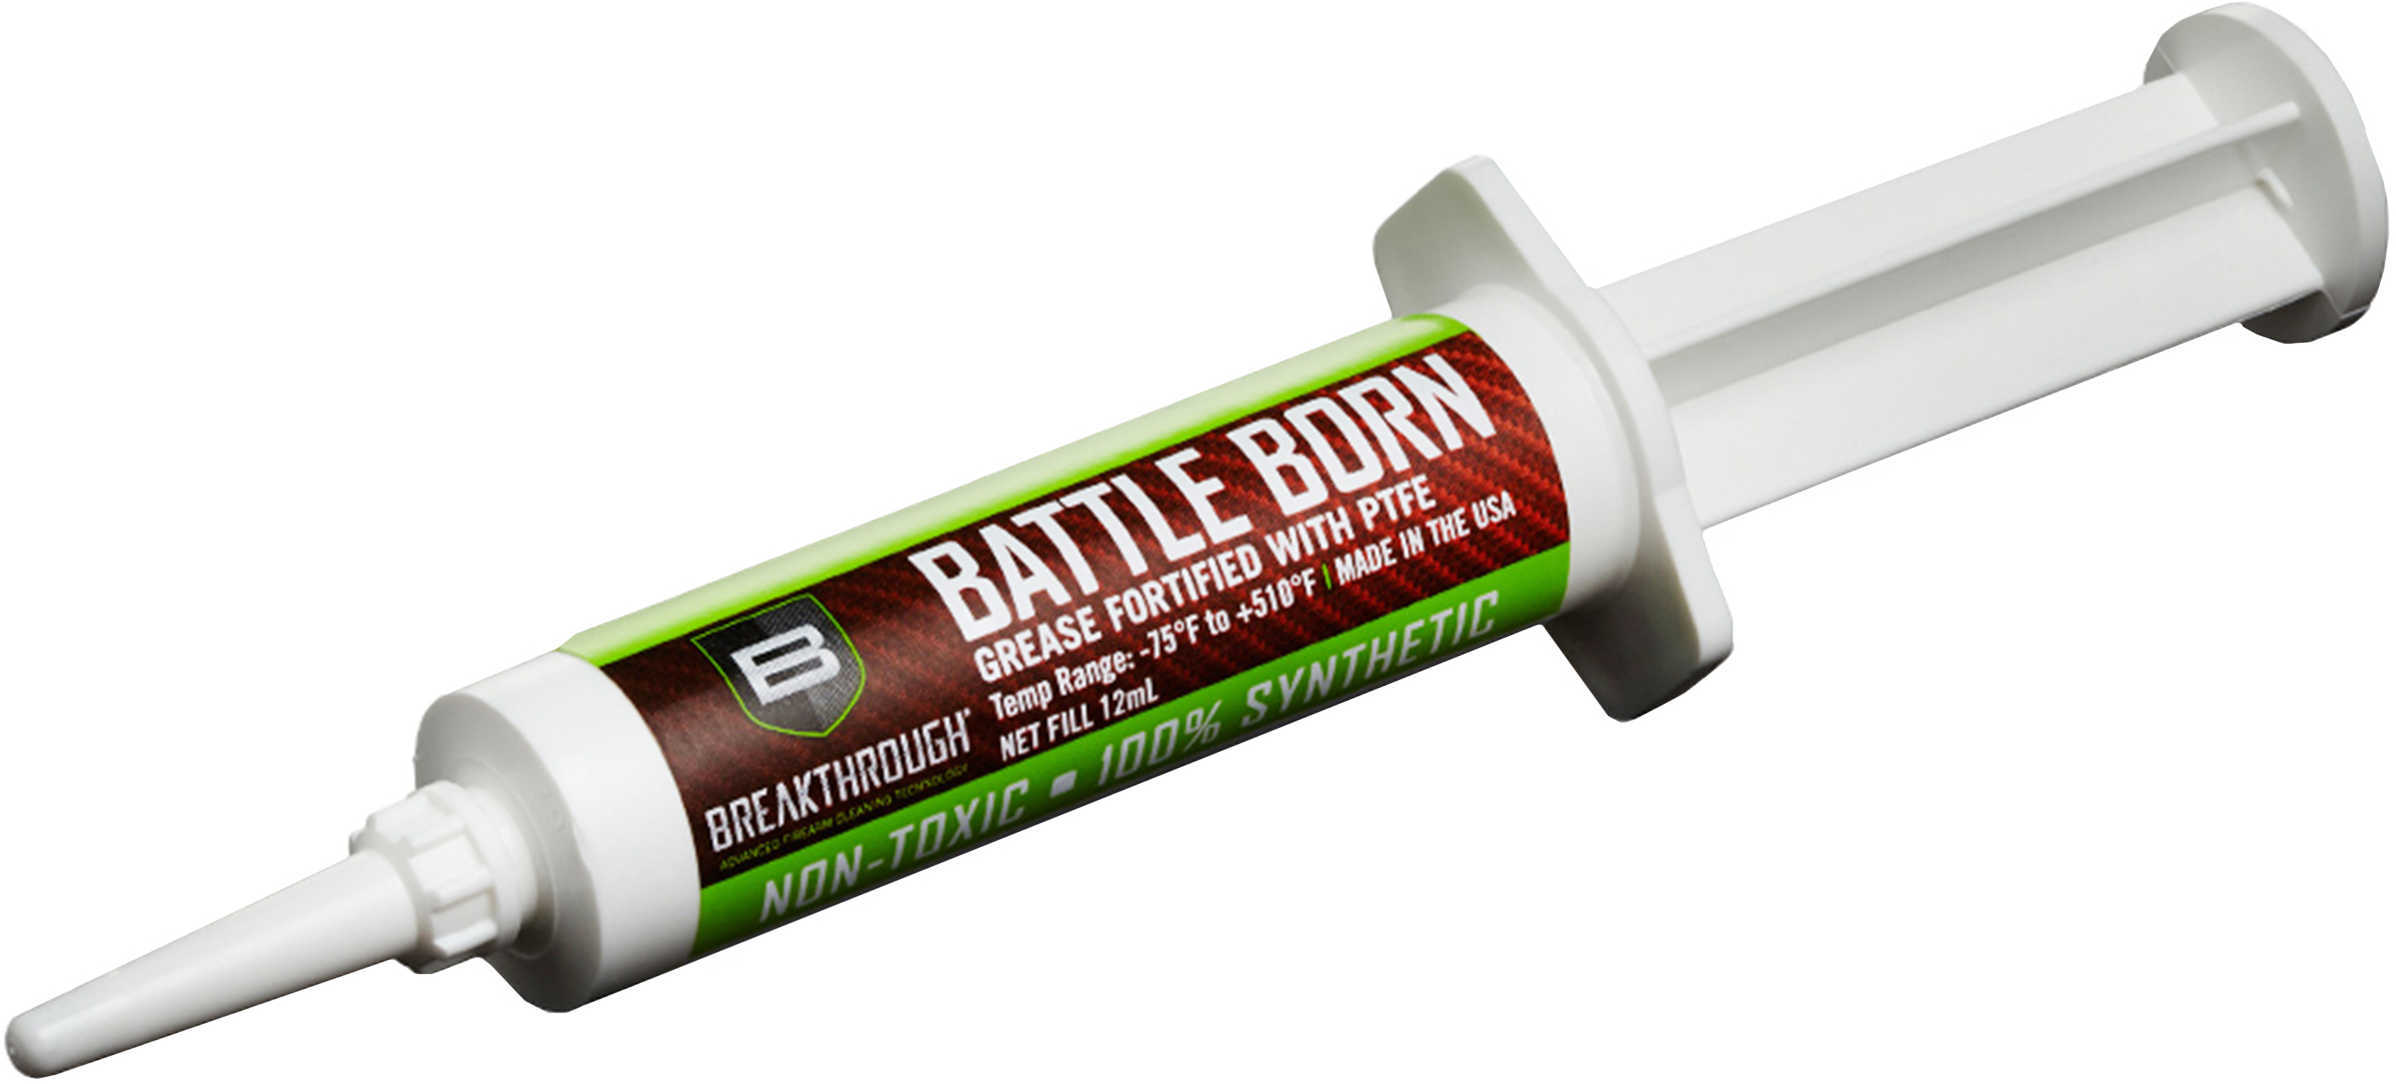 Breakthrough Battle Born GREAS Fortified W/ PTFE 12CC Syringe